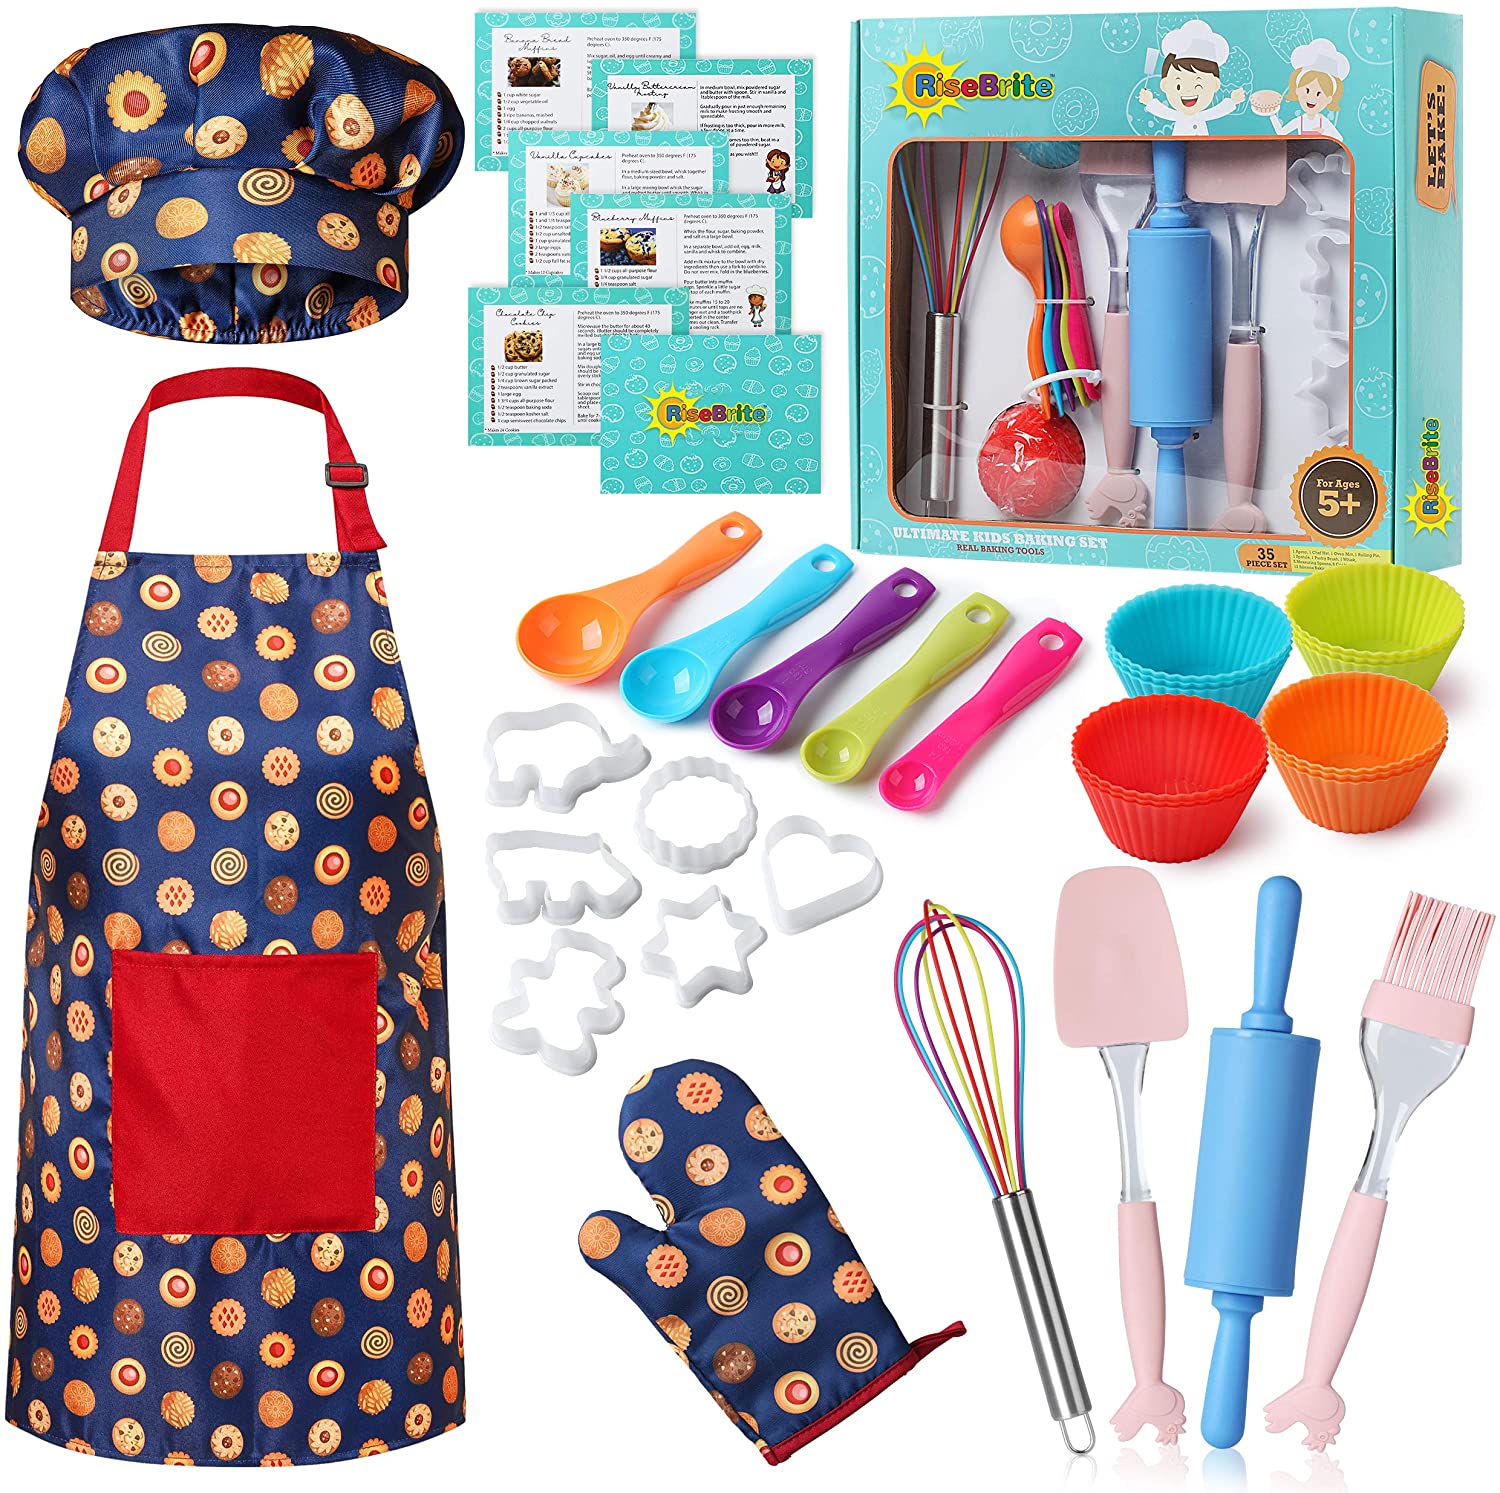 RiseBrite Kids Baking Set With Blue Cookies Apron, Chef Hat And Mitt